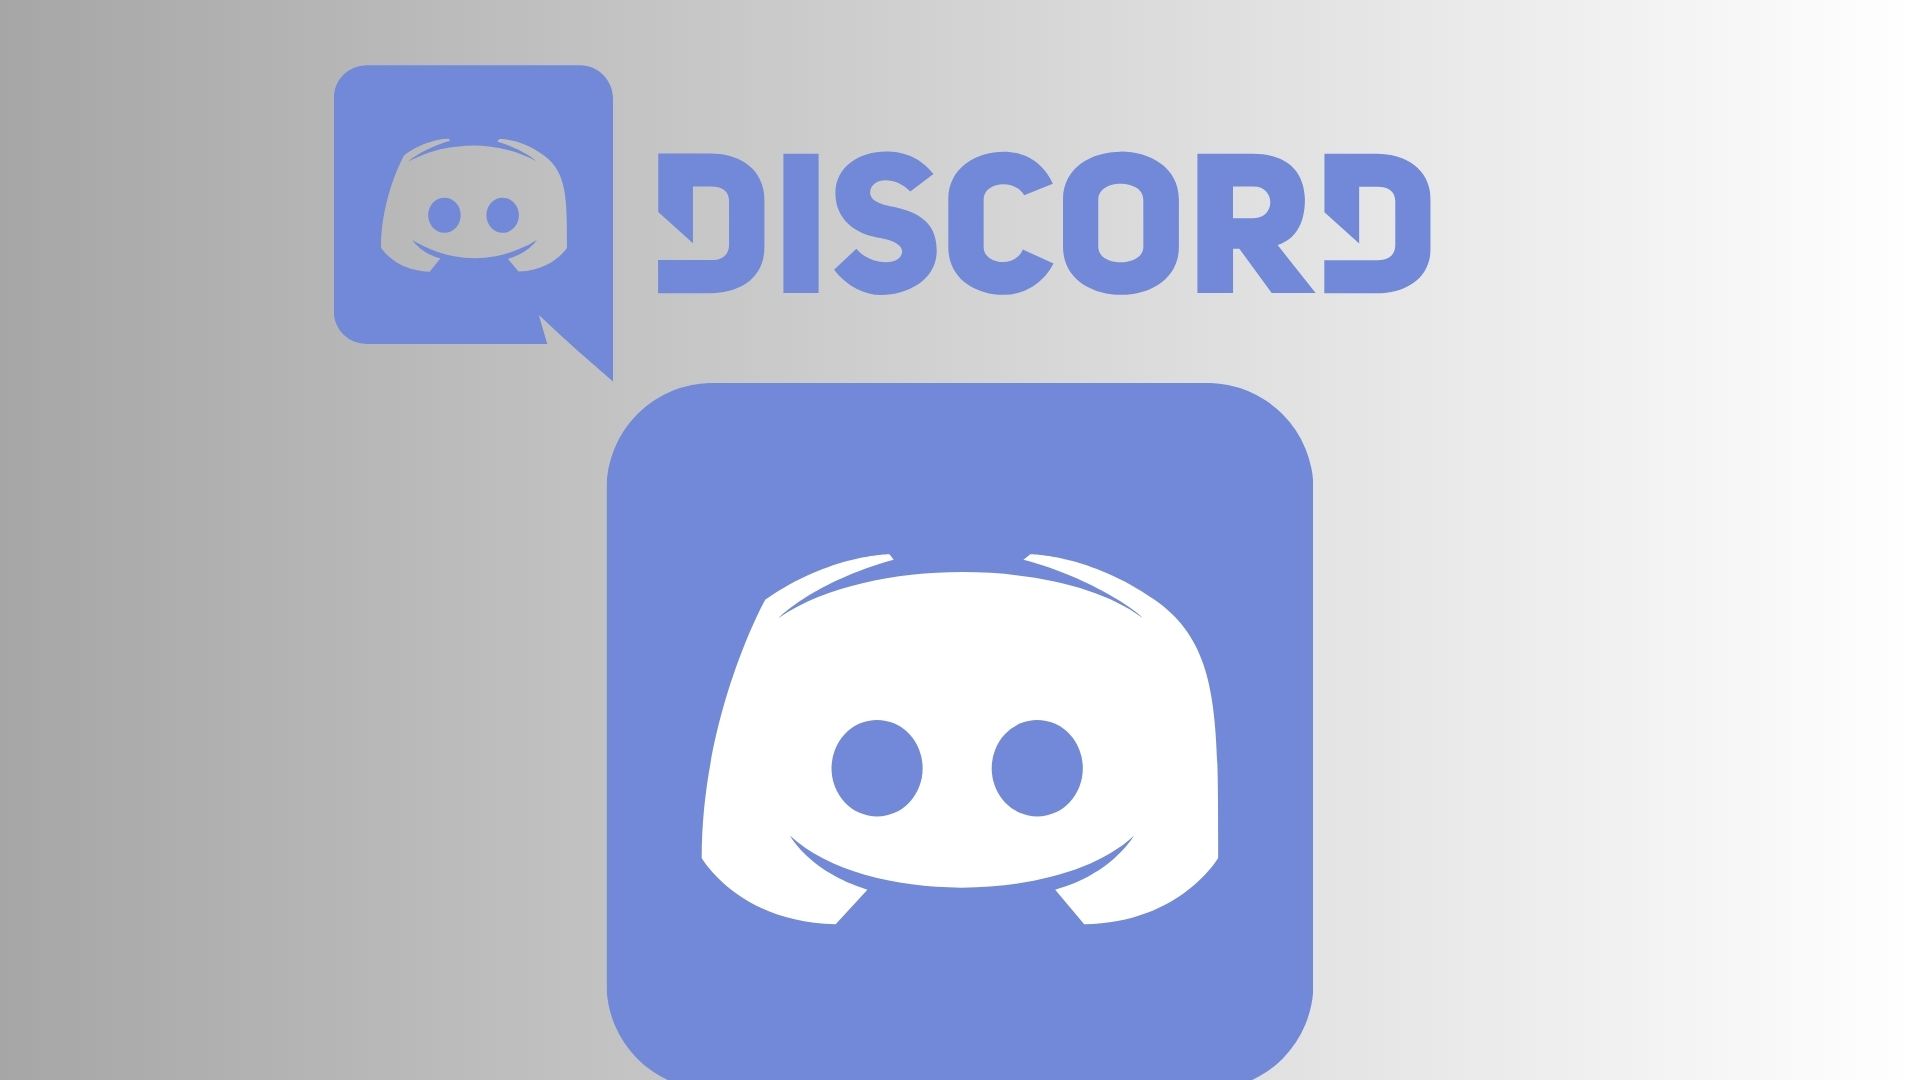 Are Discord affiliate: Everything You Need to Know